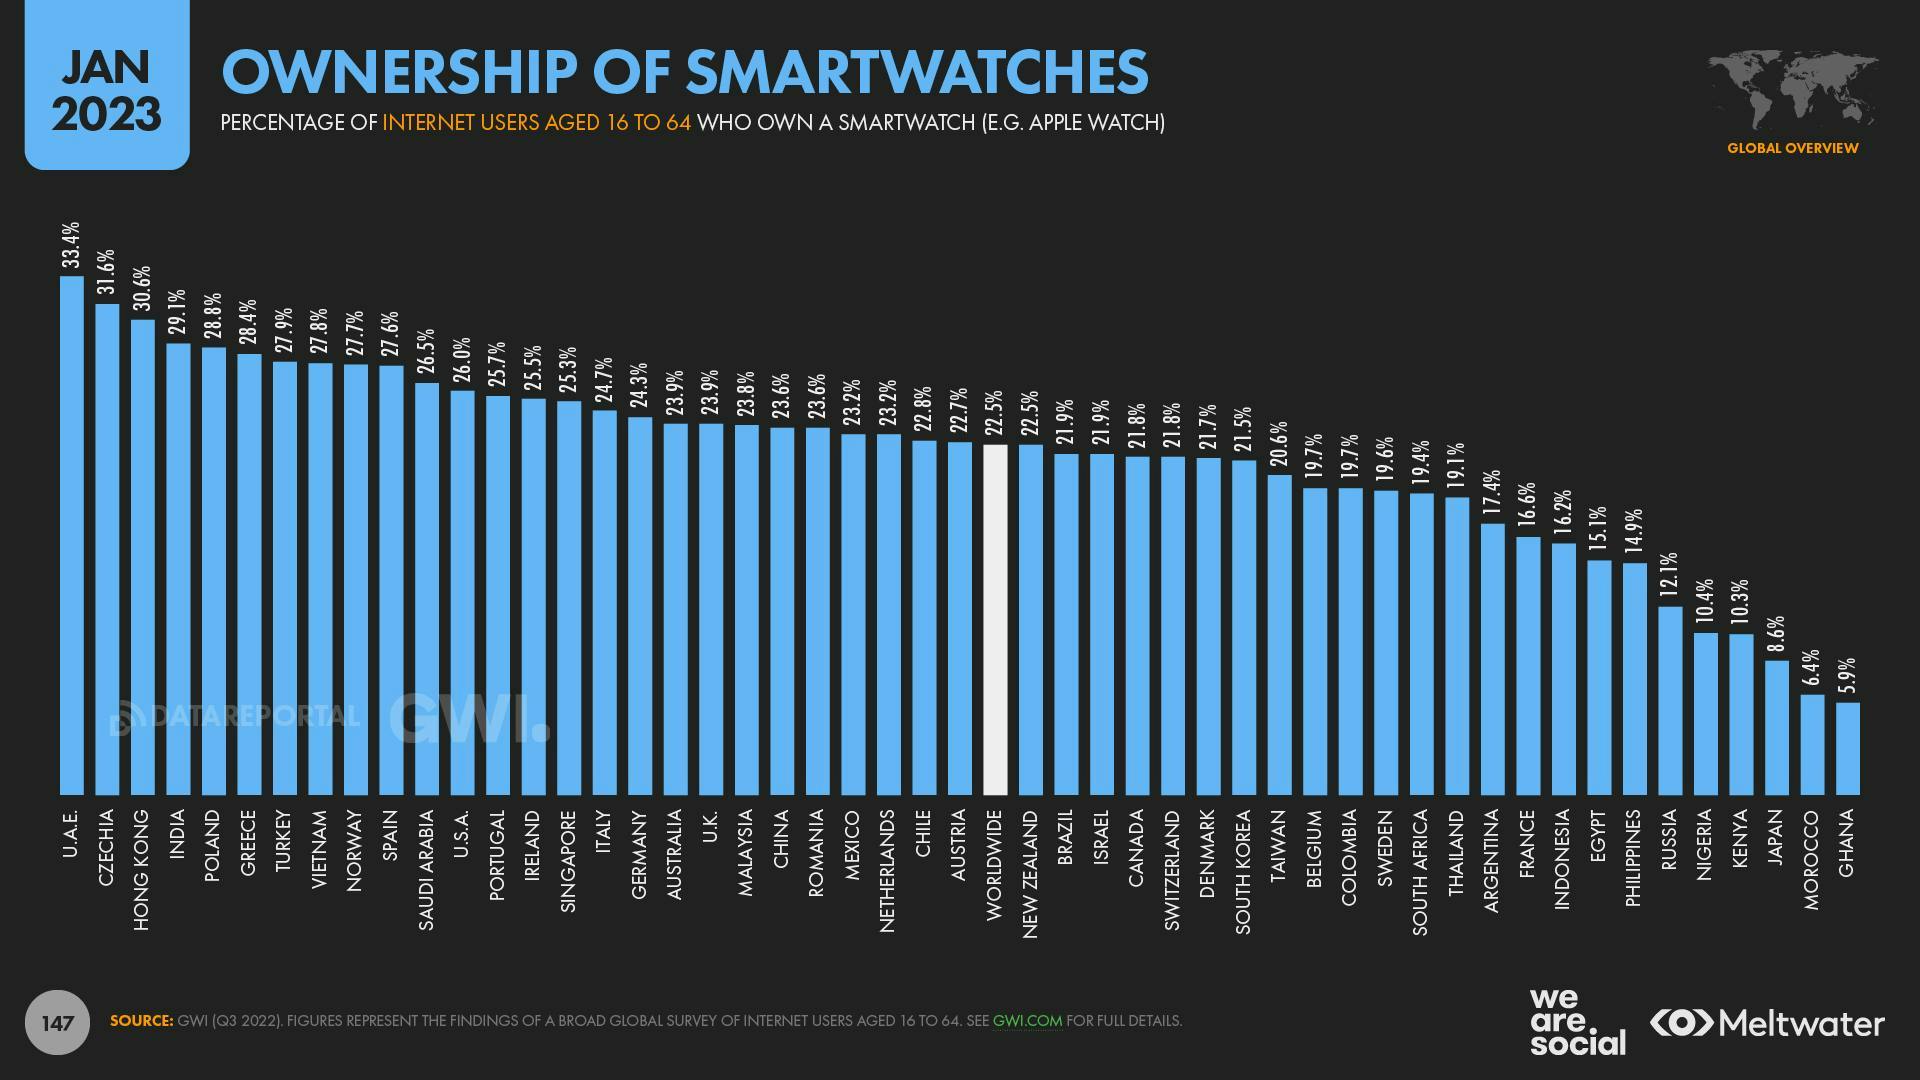 Ownership of smartwatches 2023